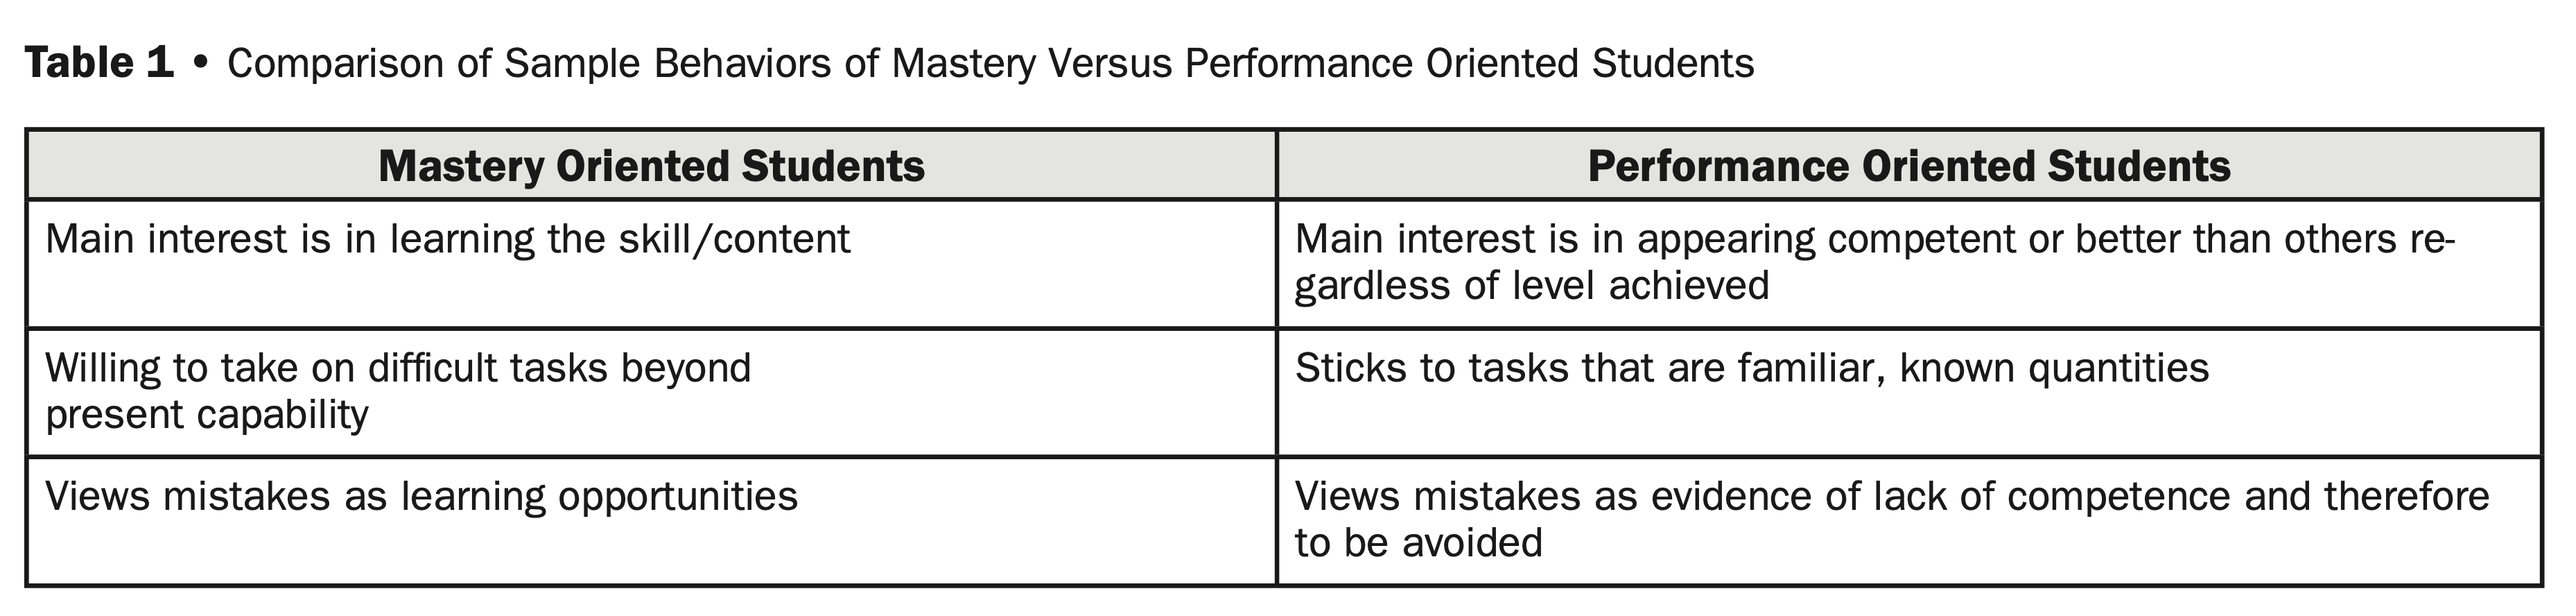 Table 1 • Comparison of Sample Behaviors of Mastery Versus Performance Oriented Students